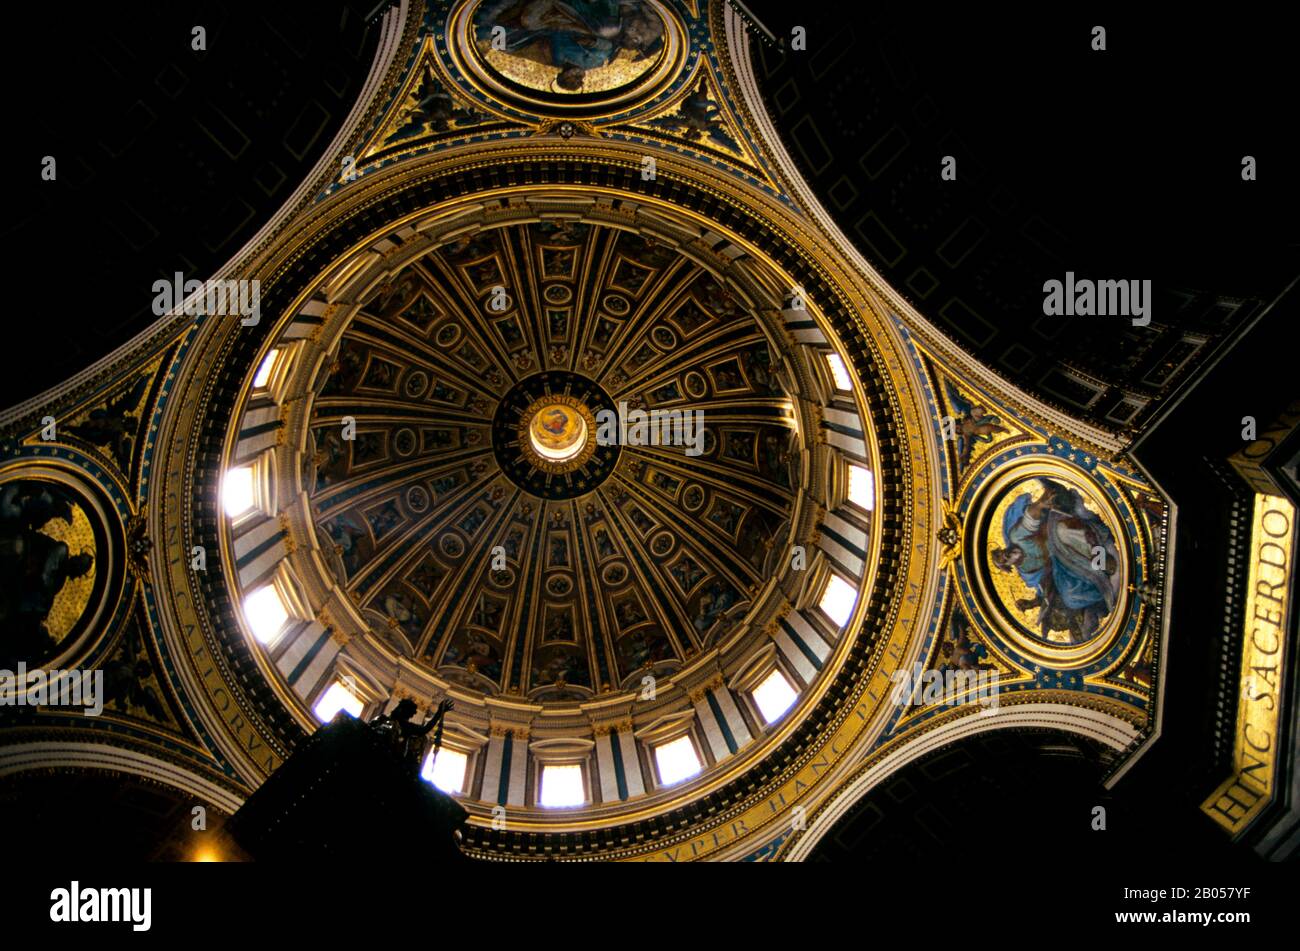 ITALY, ROME, VATICAN, ST. PETER'S SQUARE, ST. PETER'S BASILICA, INTERIOR, MICHELANGELO'S DOME Stock Photo